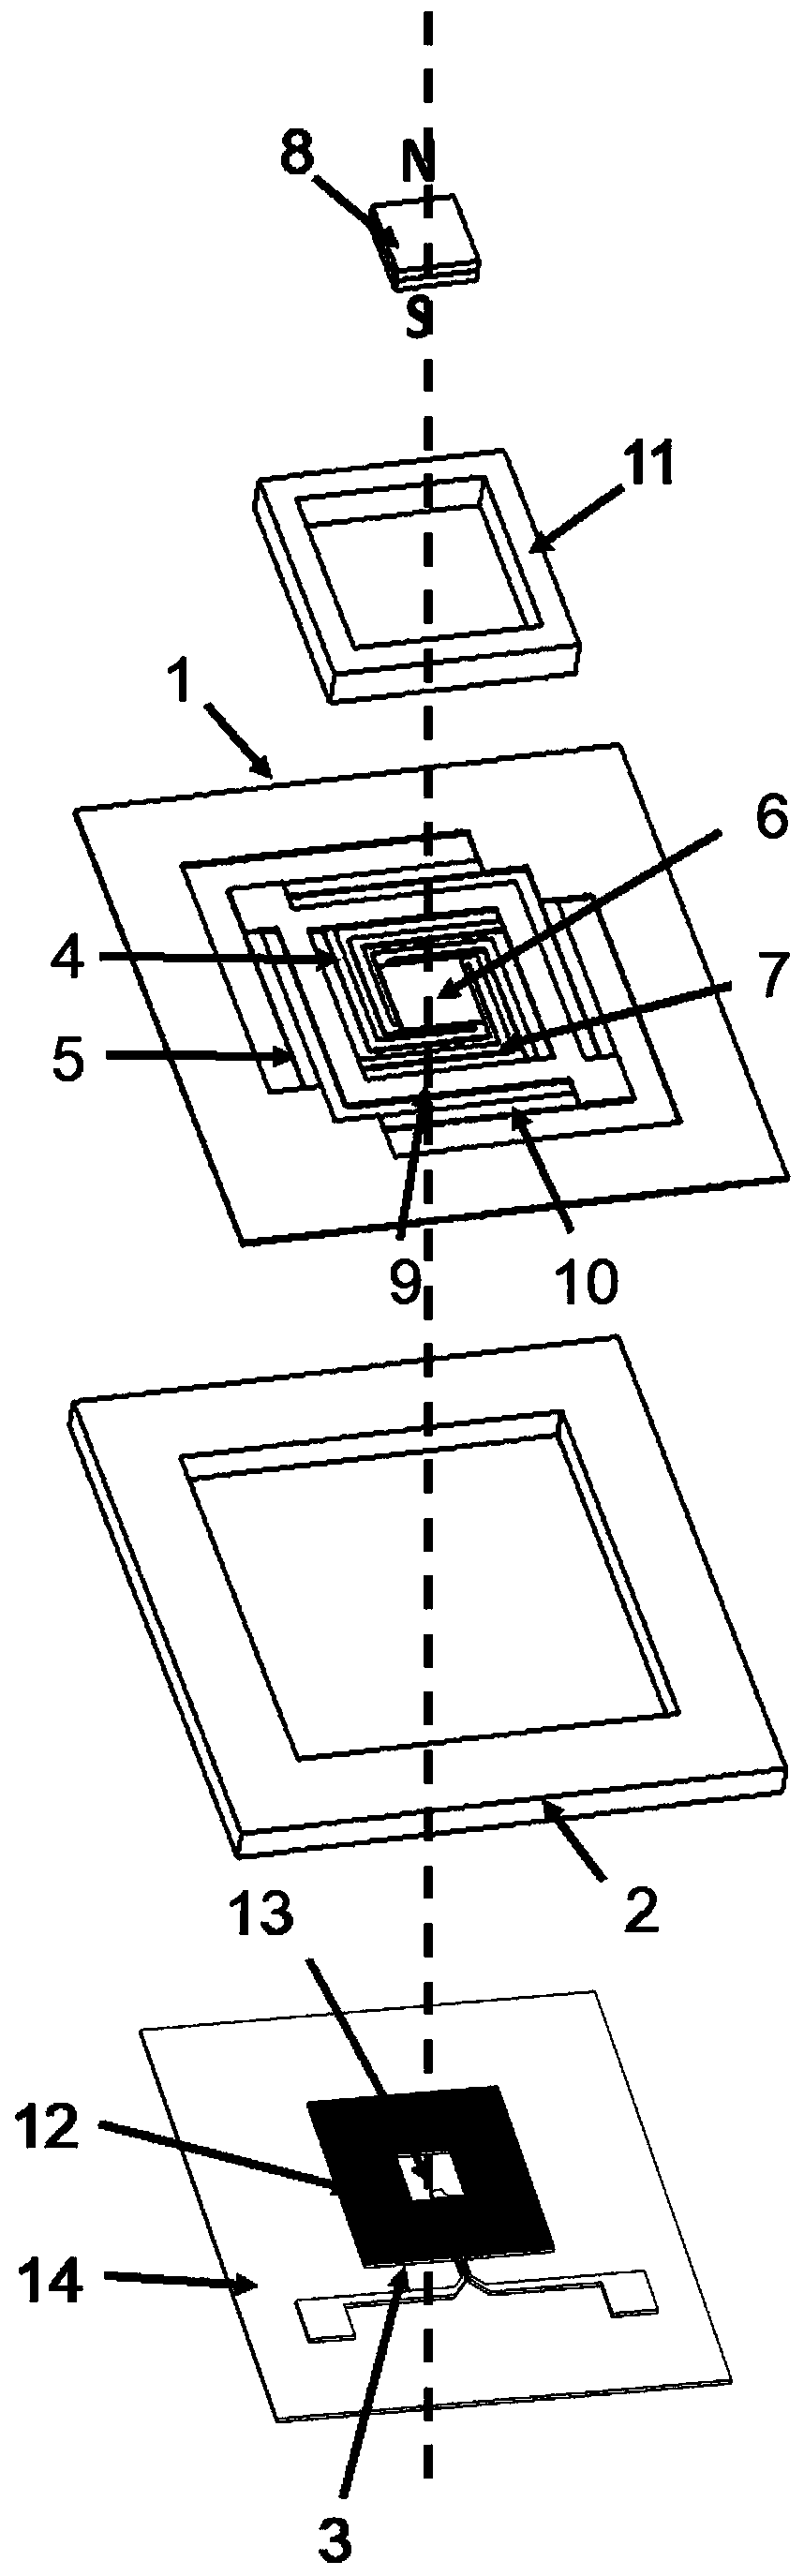 Integrally manufactured nonlinear cascaded multi-degree-of-freedom vibration energy collector